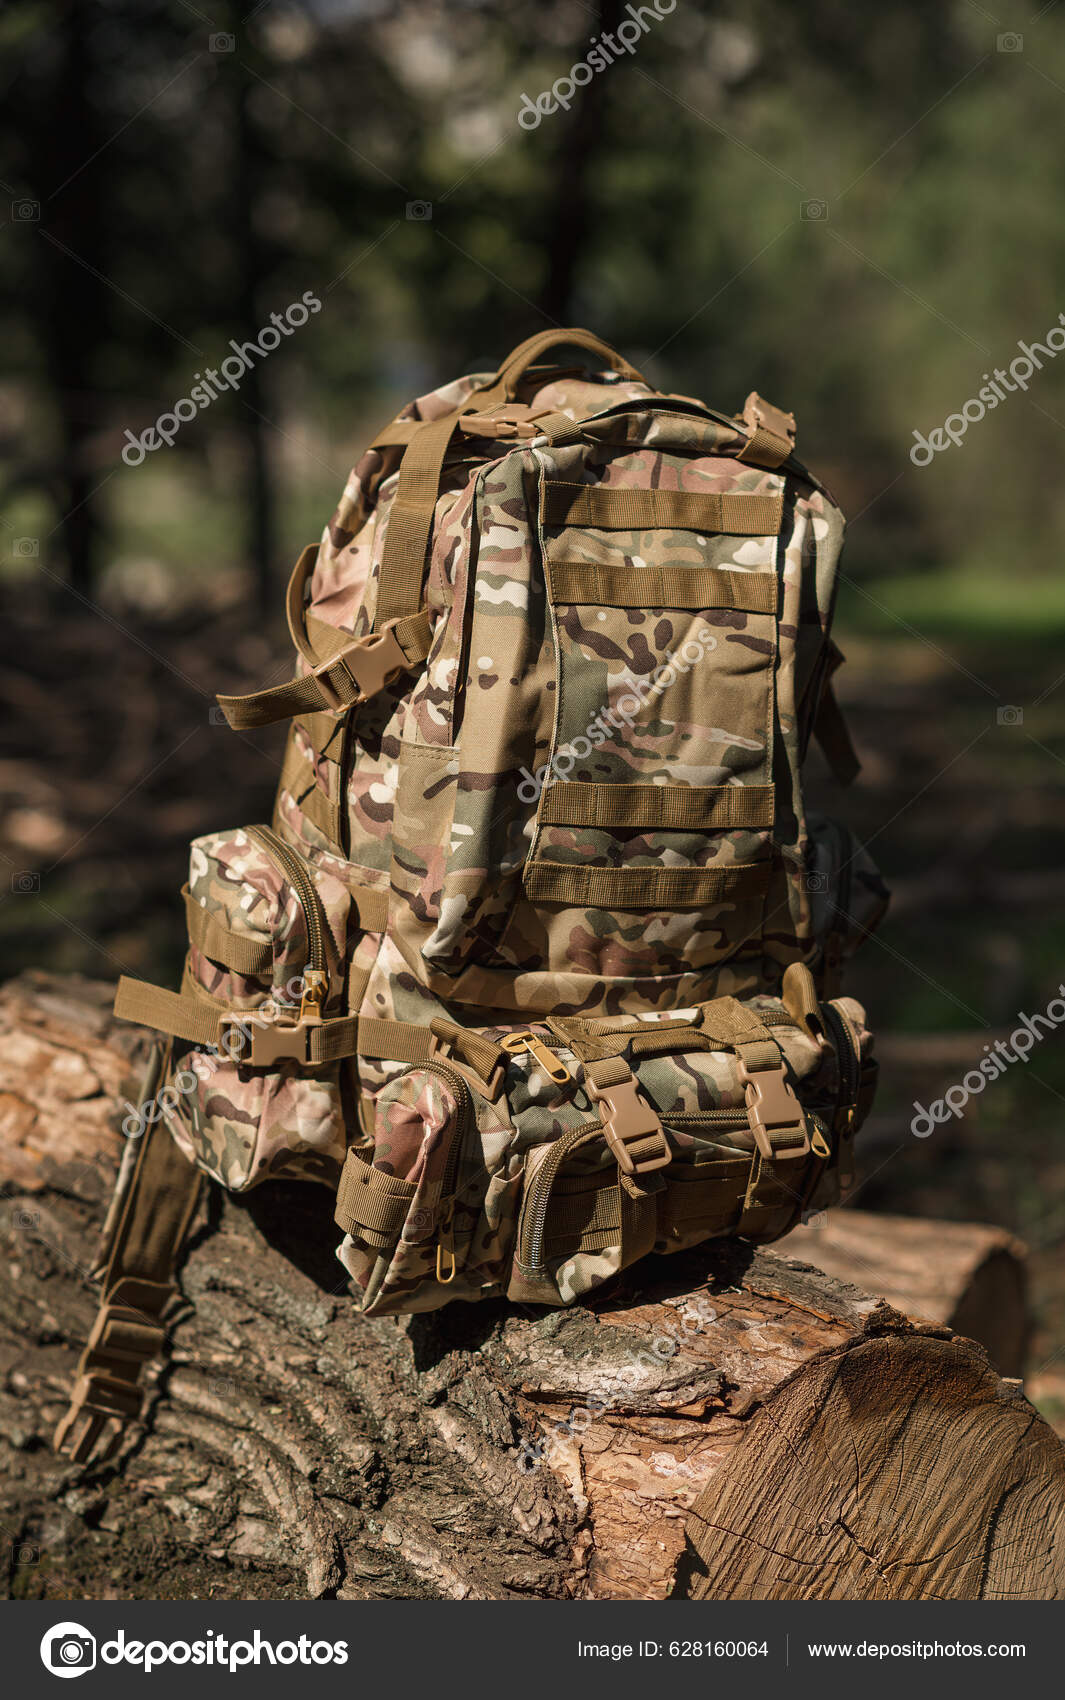 https://st5.depositphotos.com/1546698/62816/i/1600/depositphotos_628160064-stock-photo-backpack-military-special-tactical-backpack.jpg